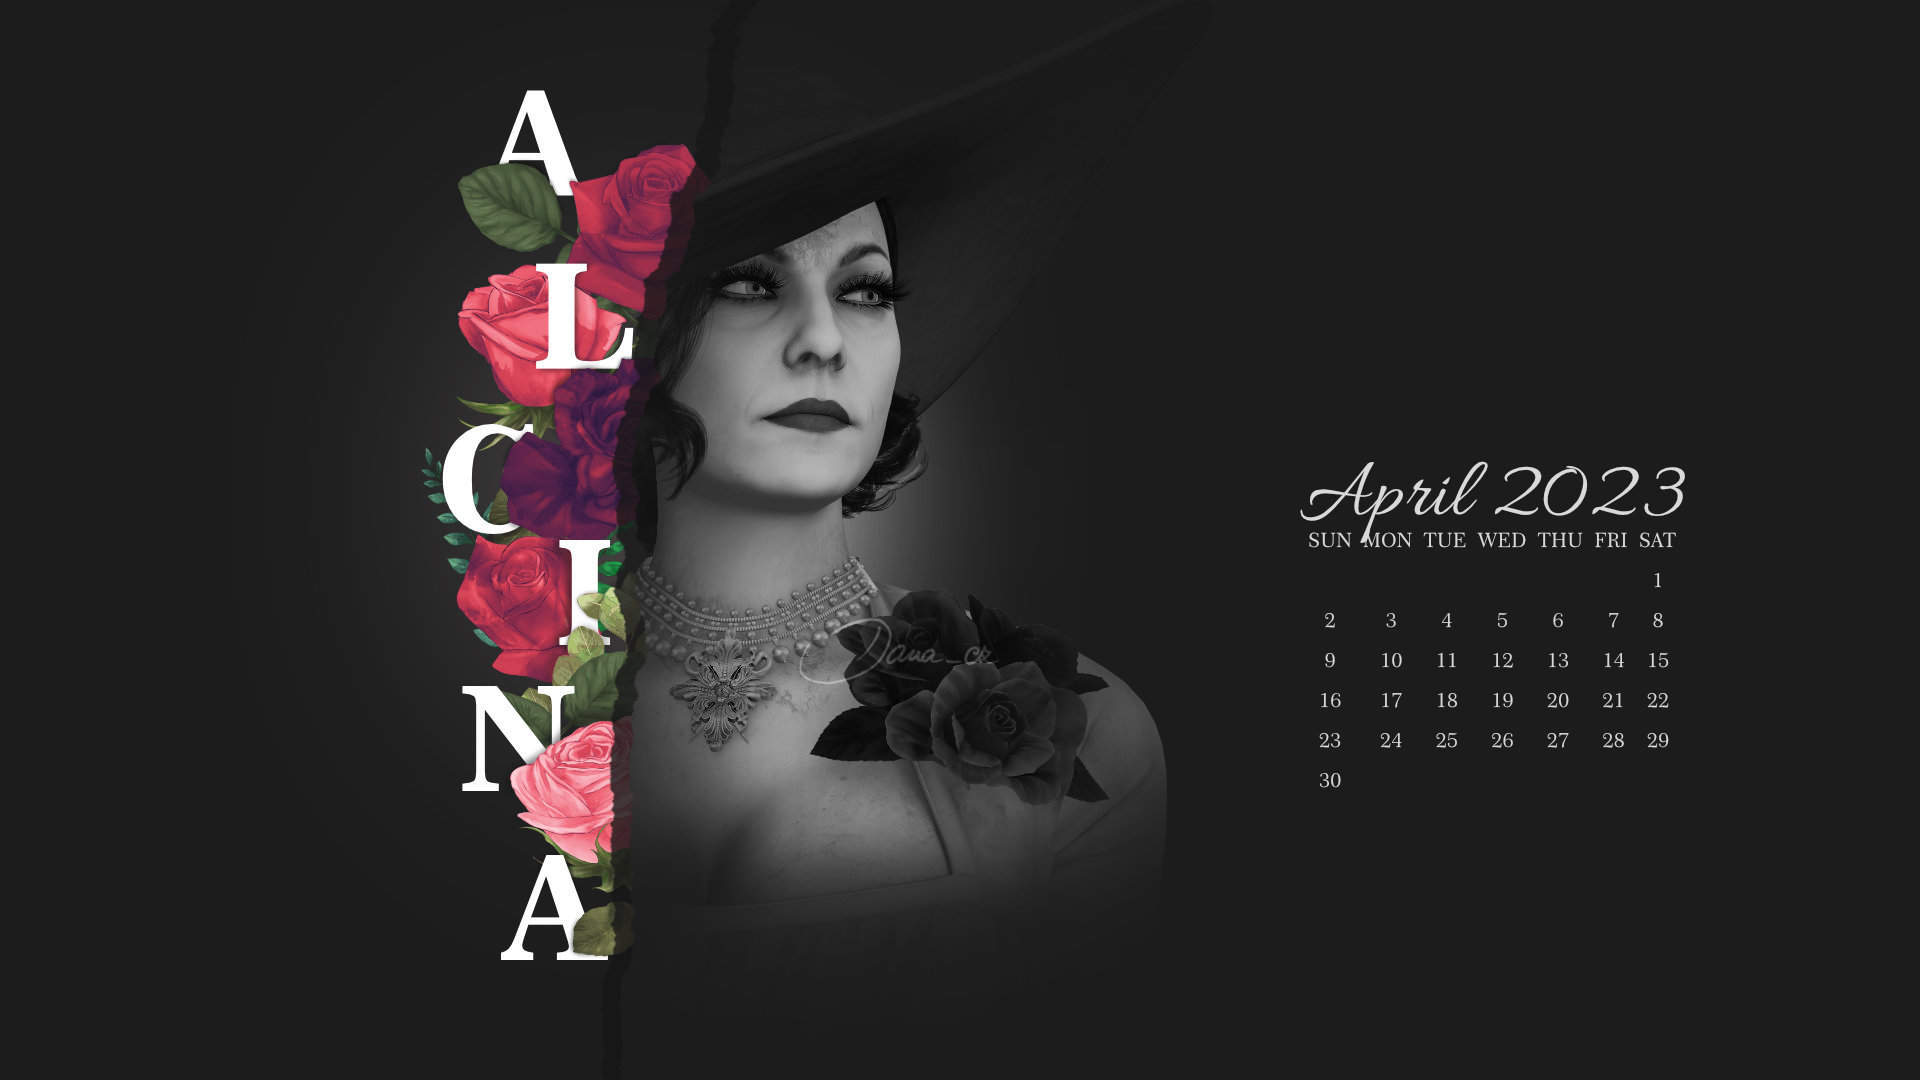 April 2023 wallpaper free April 2023 wallpapers Archives  Oh So Lovely Blog